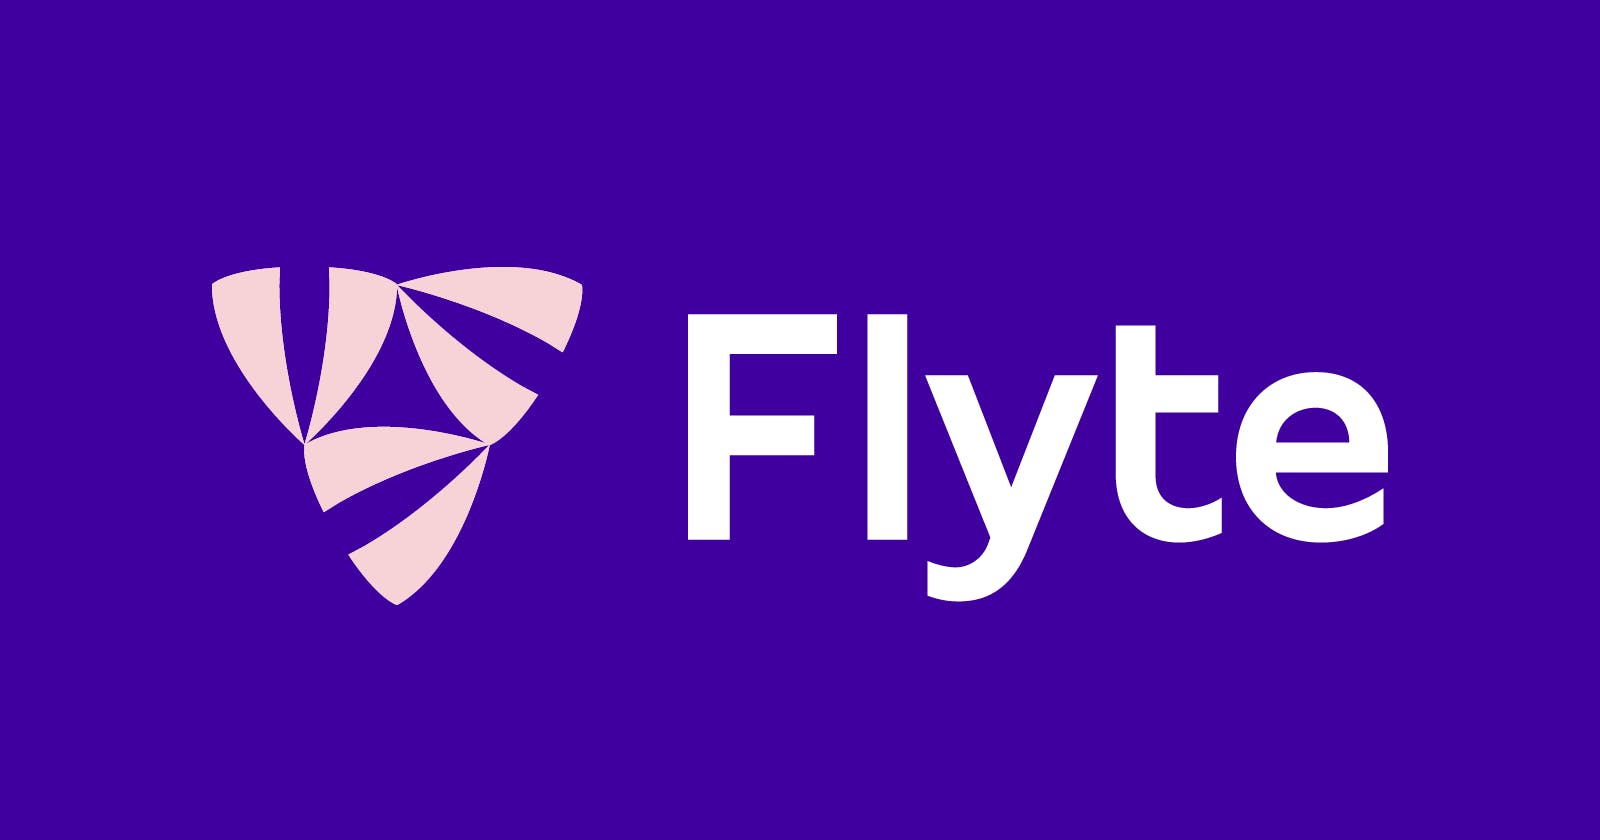 Introducing Flyte: A Cloud Native Machine Learning and Data Processing Platform